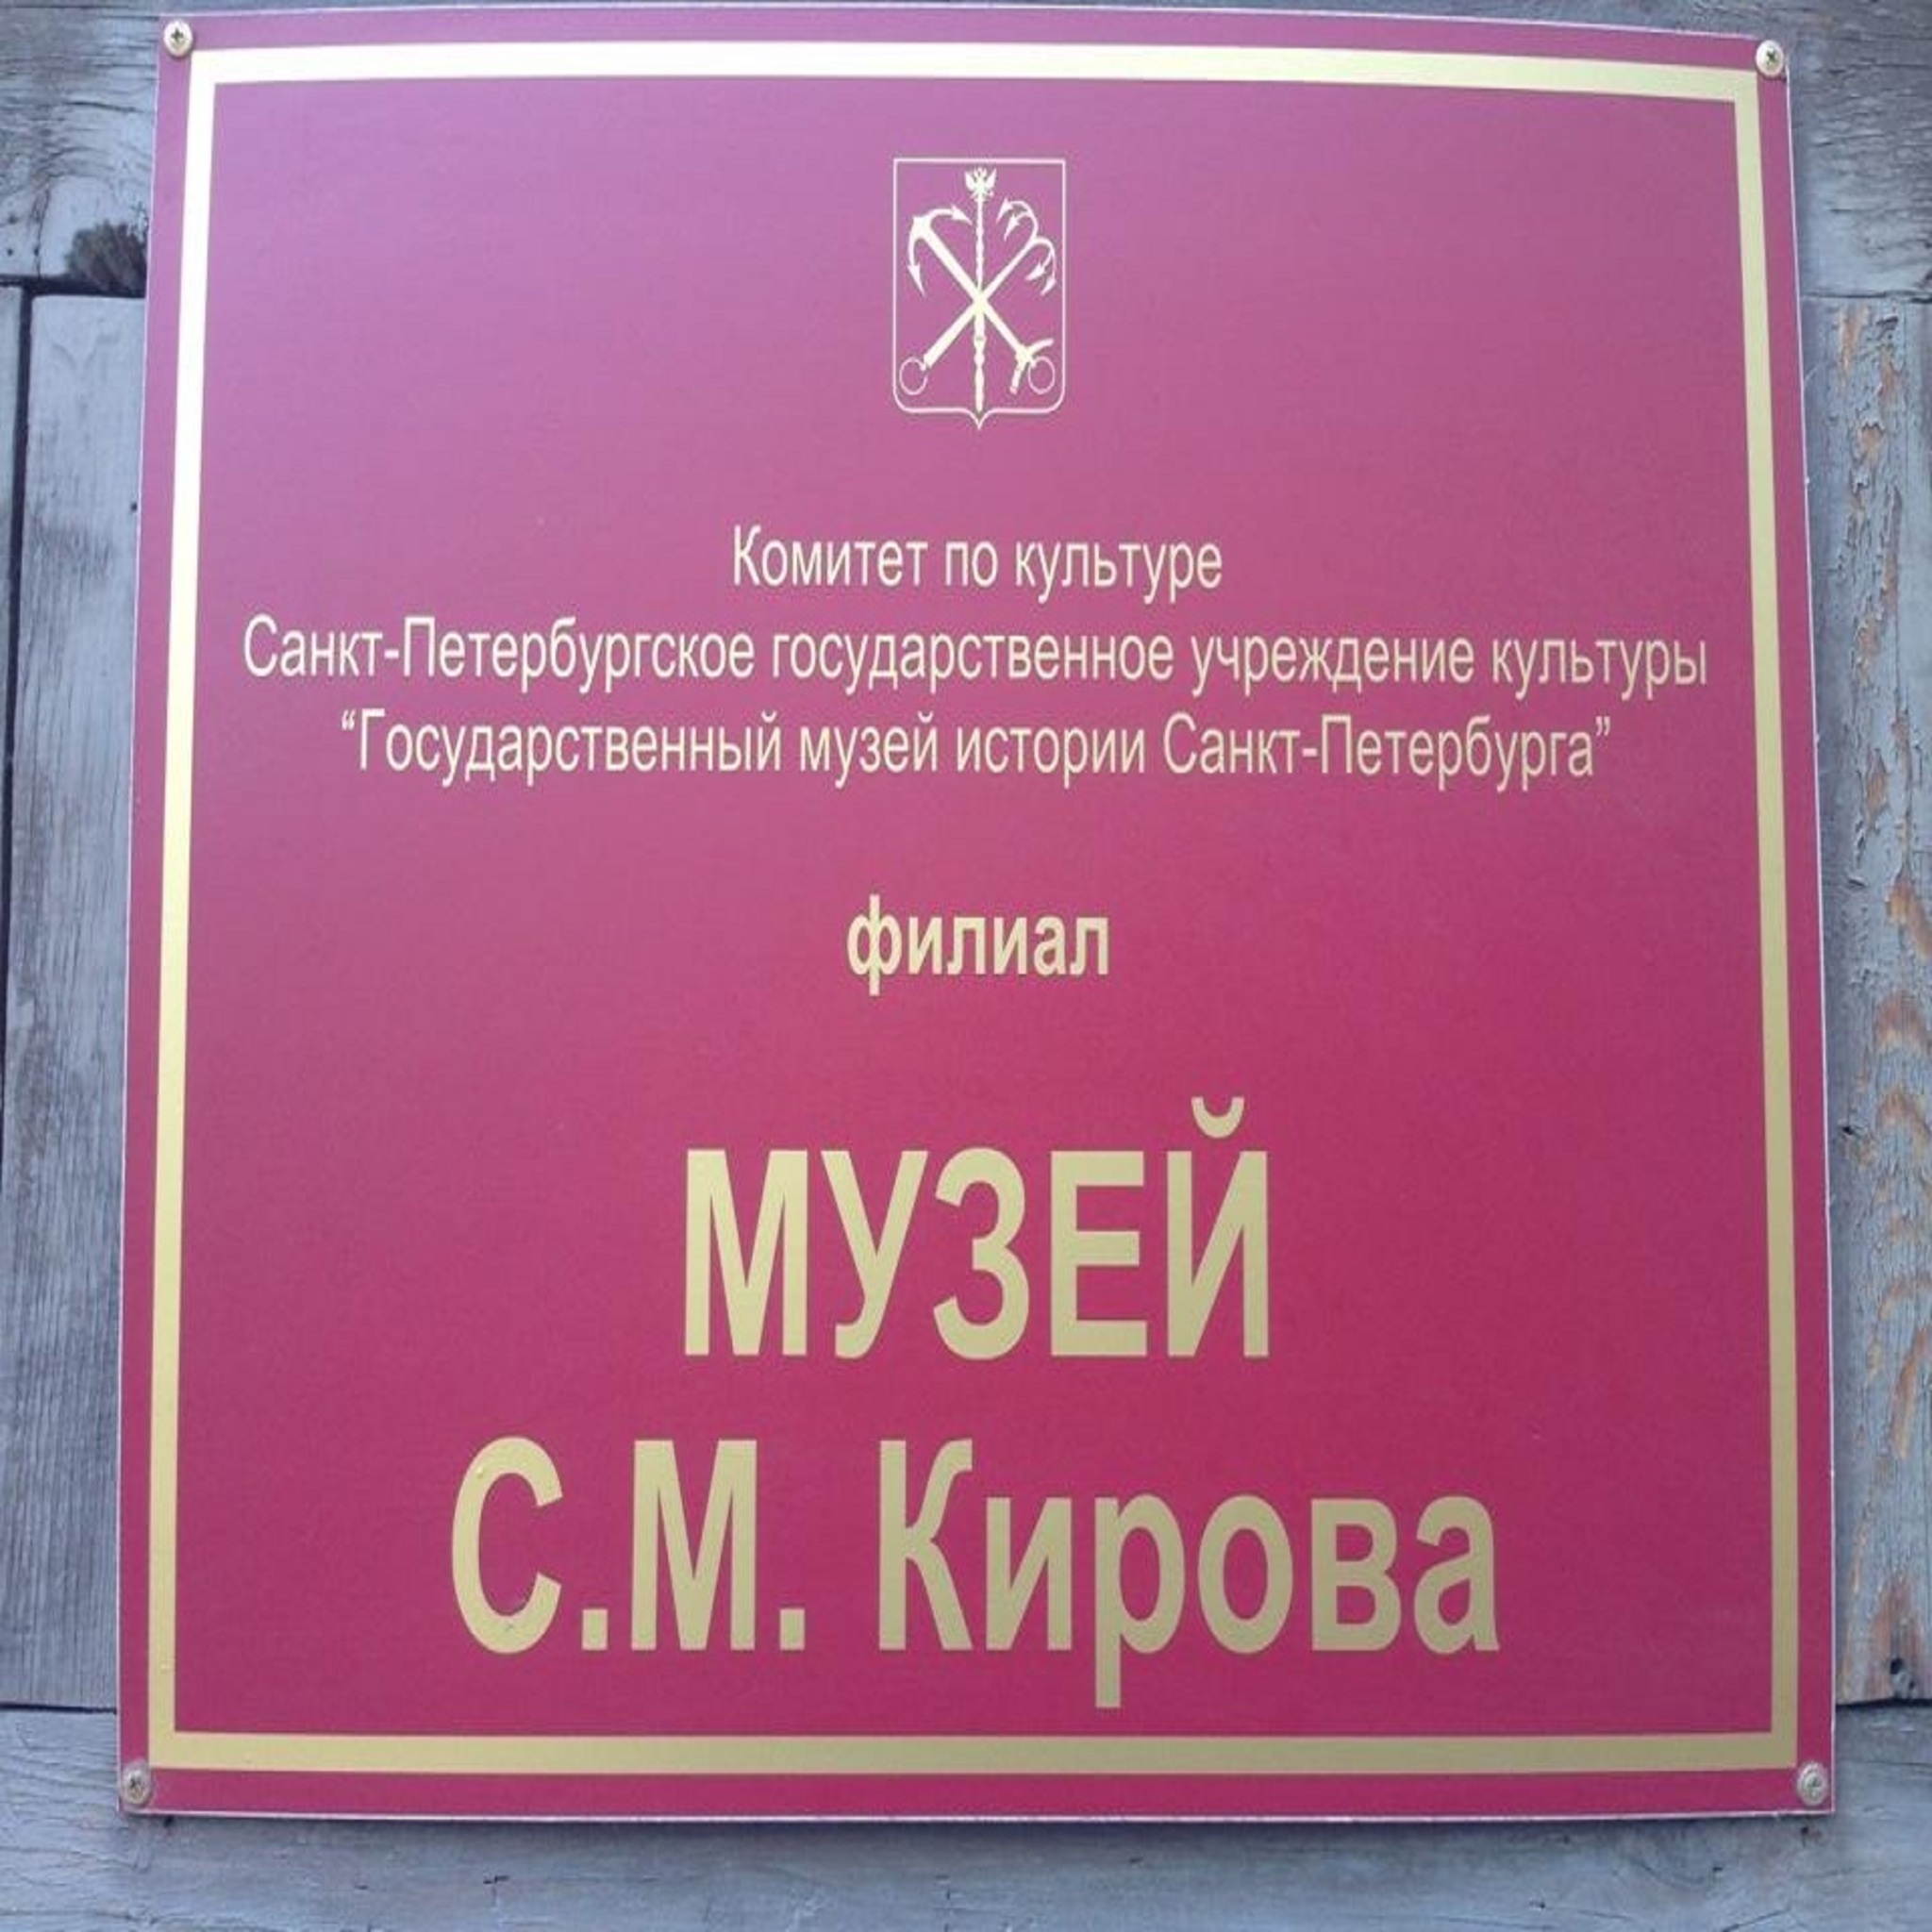 The museum of S. M. Kirov